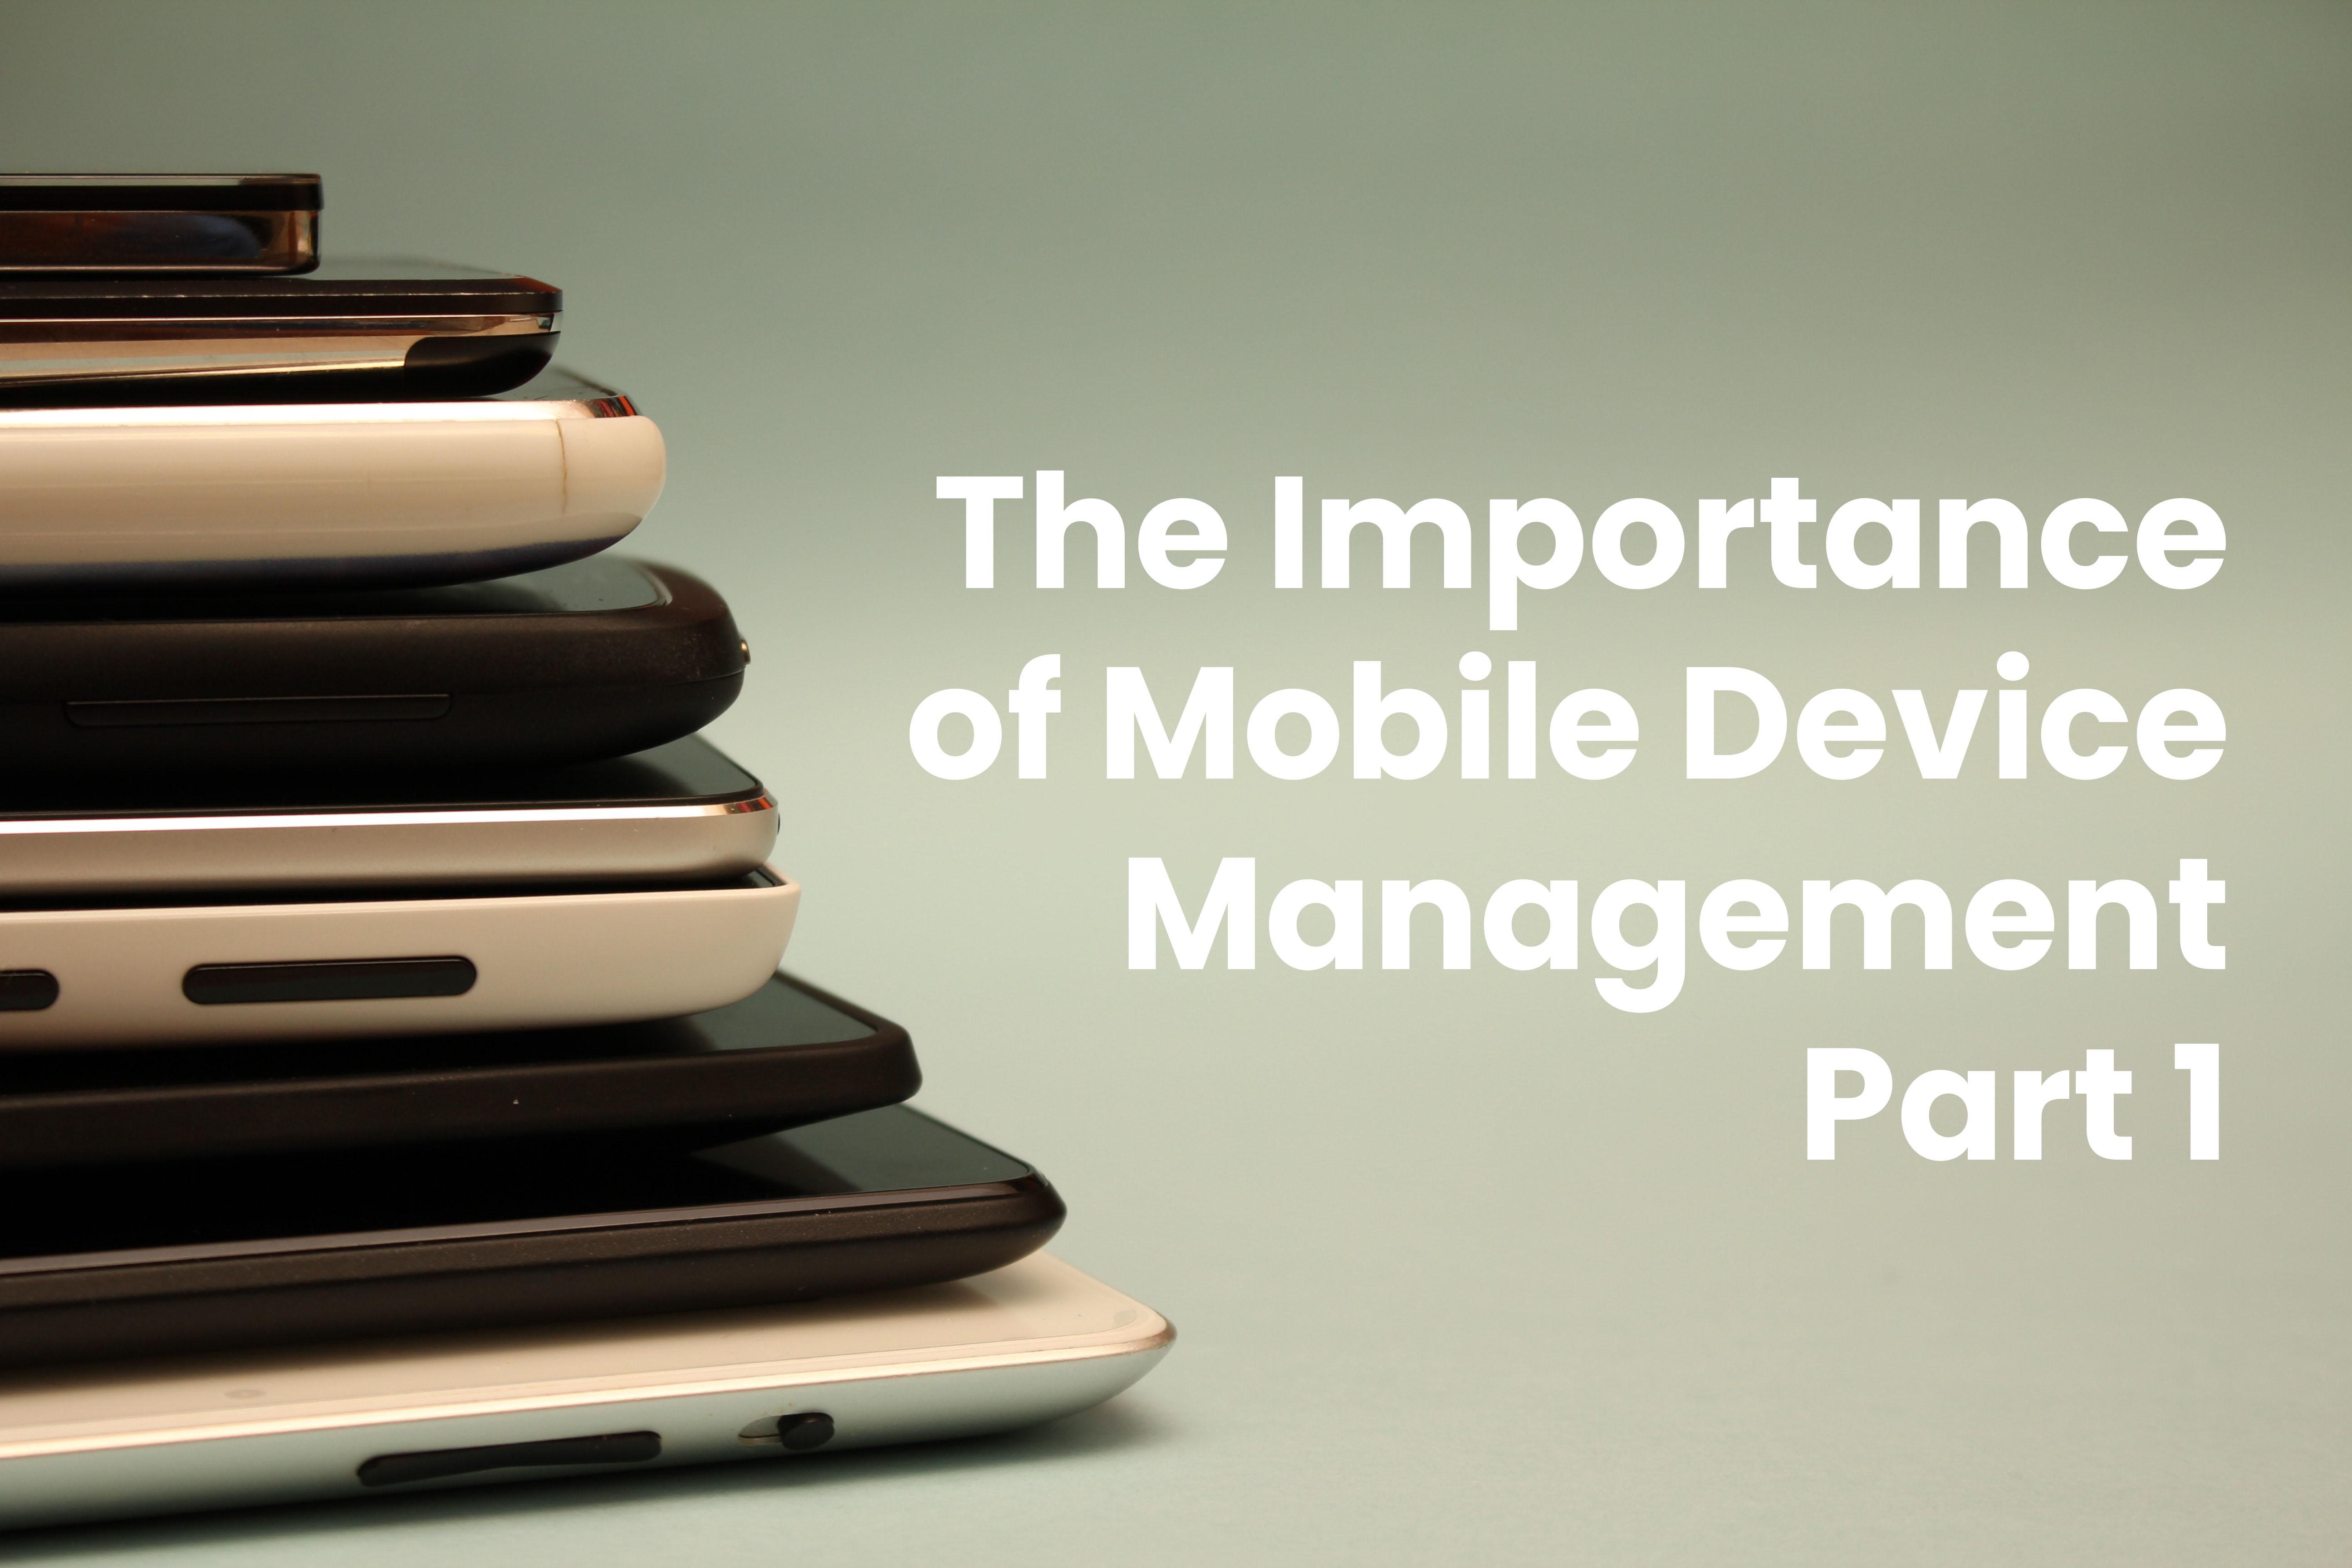 The Importance of Mobile Device Management, Part 1